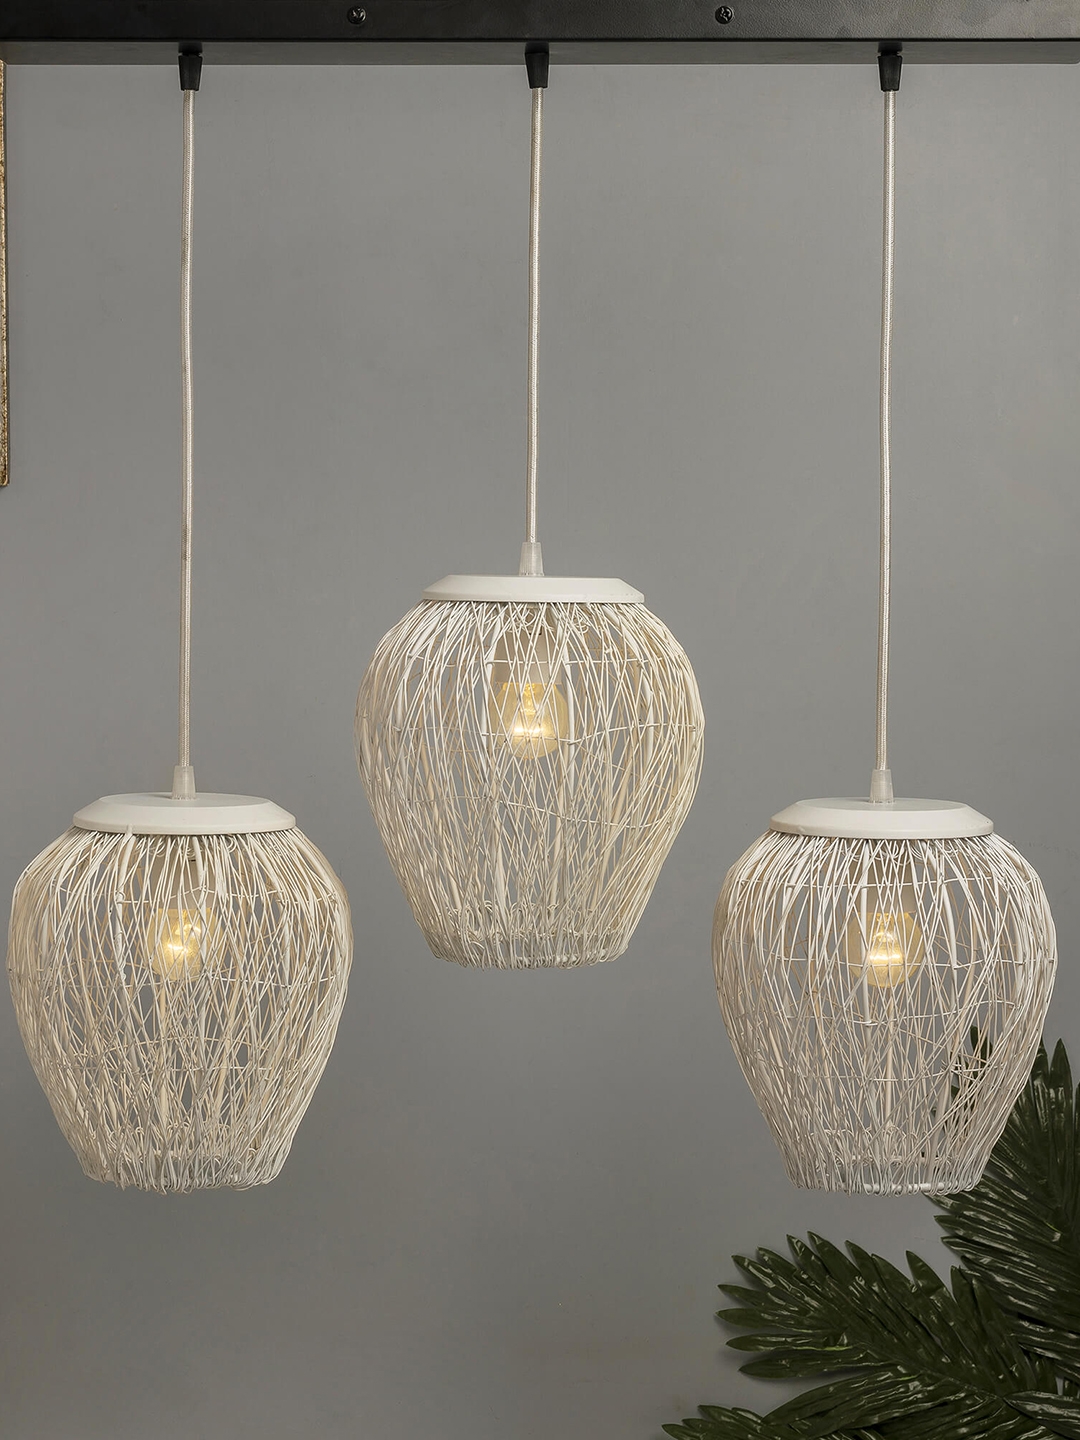 Homesake White 3 Lights Textured Handcrafted Wire Mesh Cluster Light